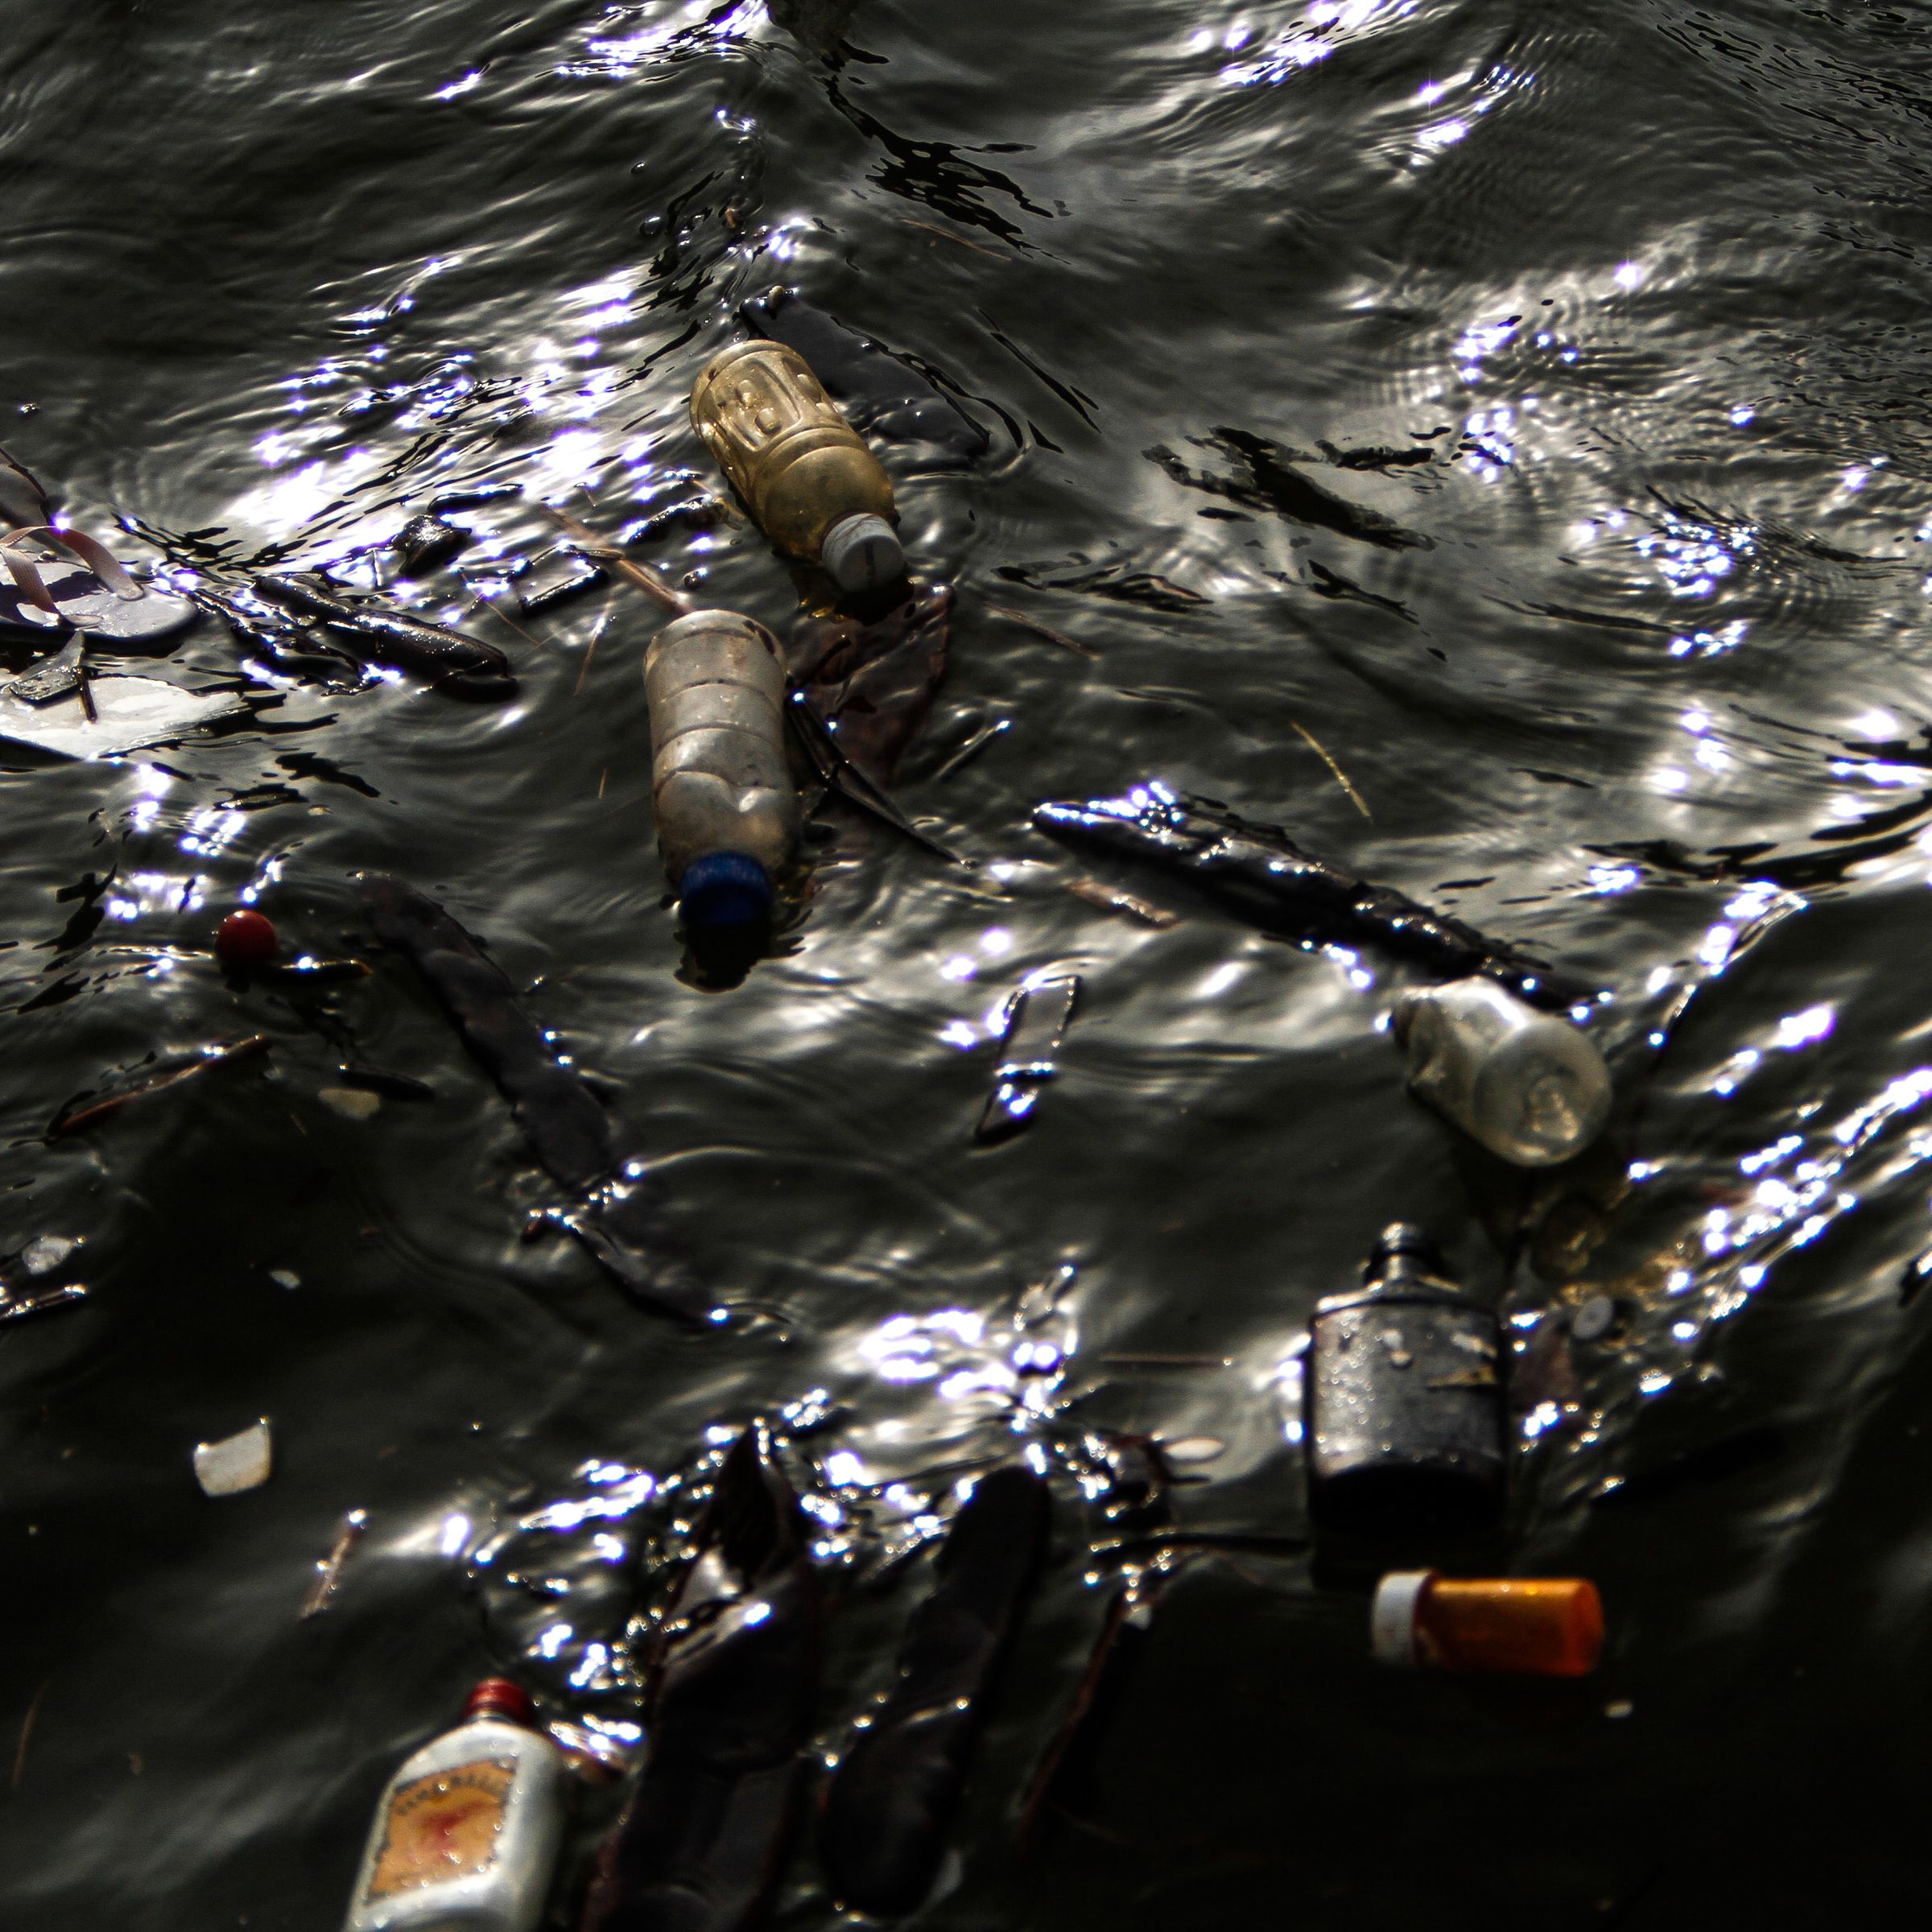 Garbage floats in the Flint River